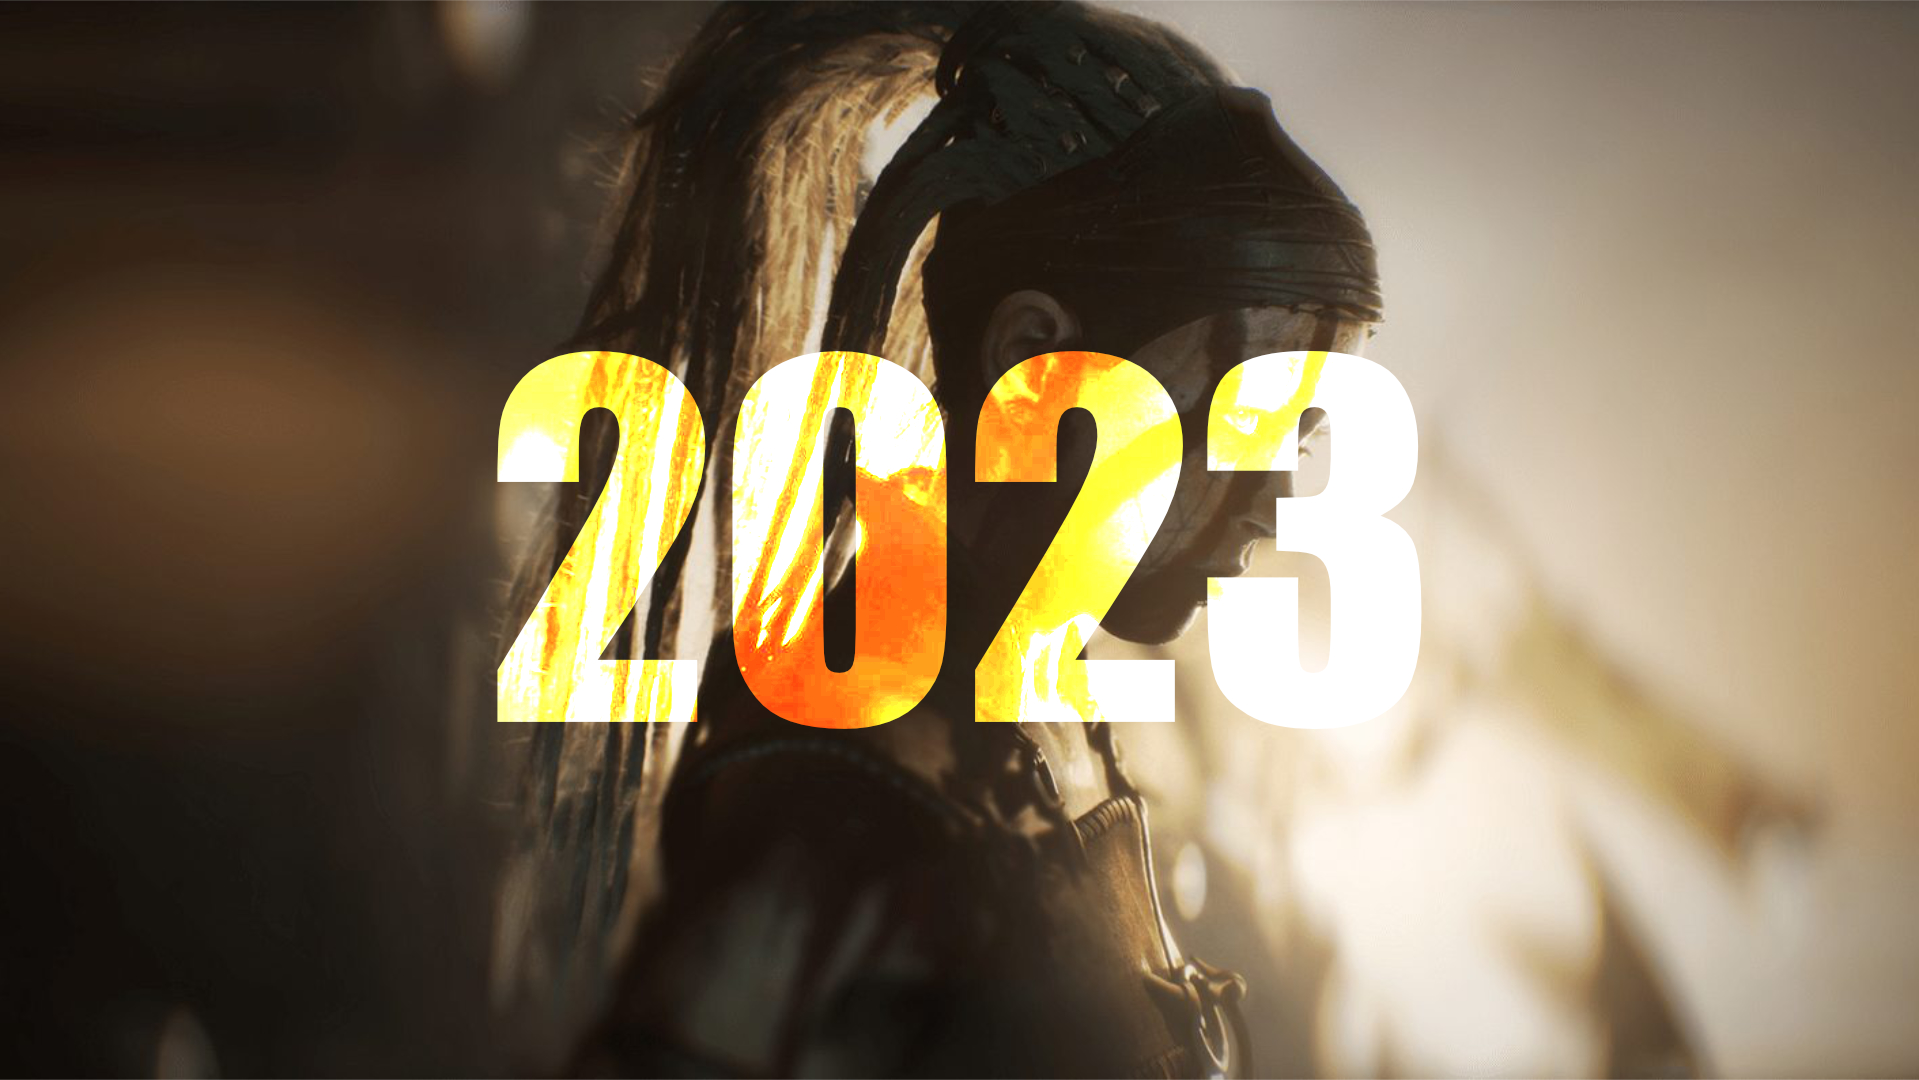 Hellblade 2 Might Have Been Teased for a 2023 Release